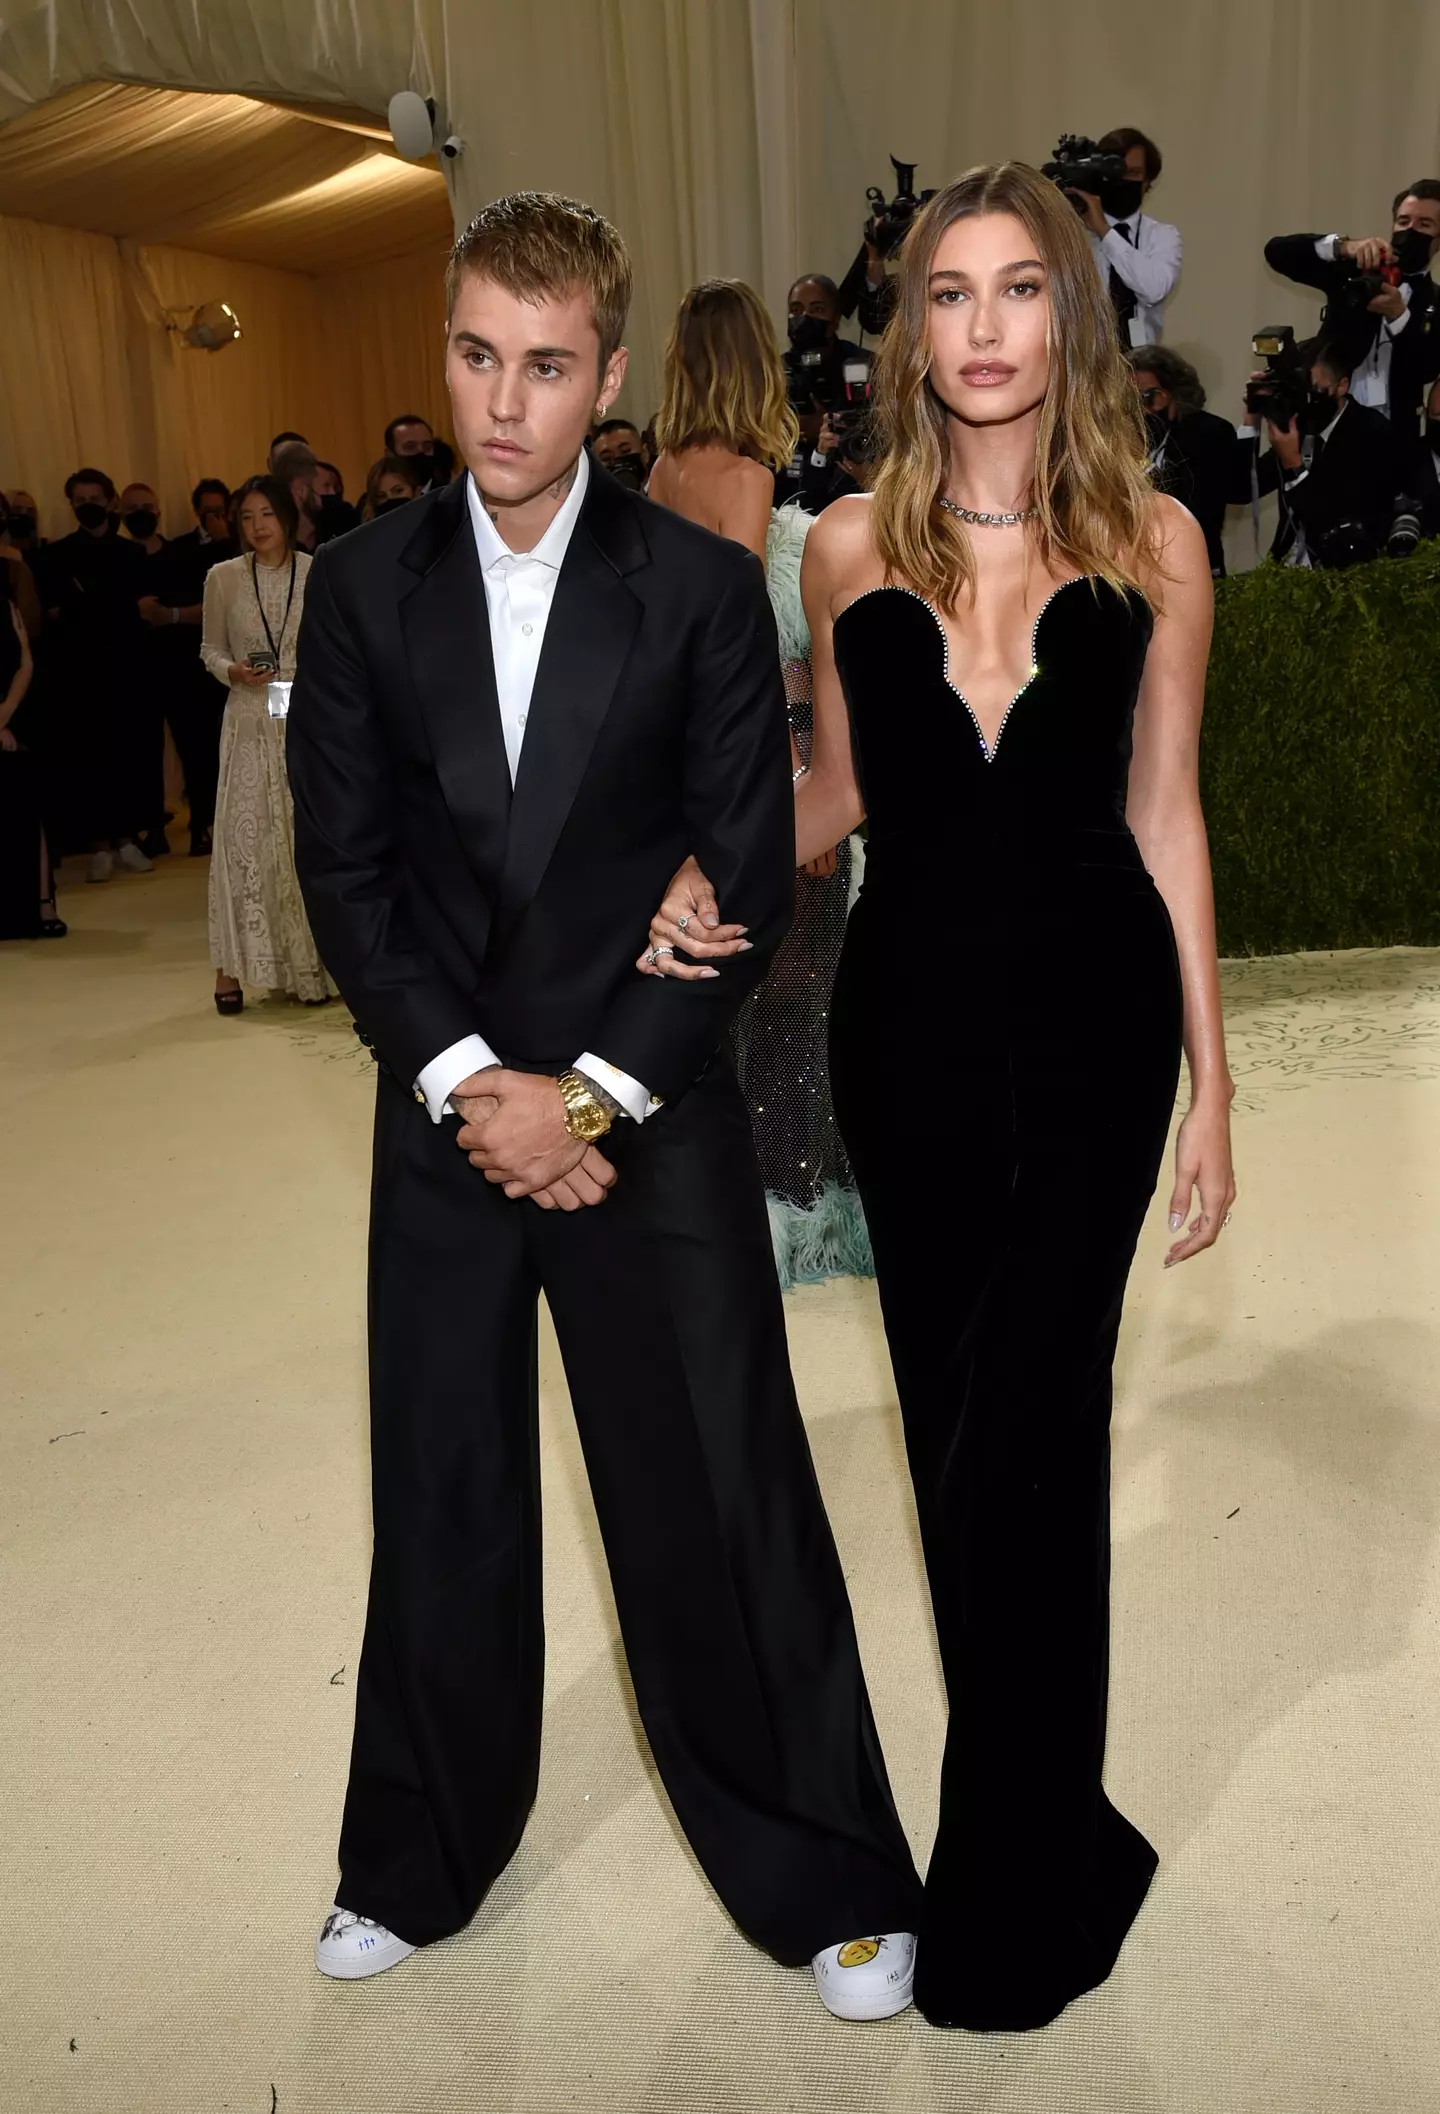 Justin and Hailey Bieber were heckled at the Met Gala (